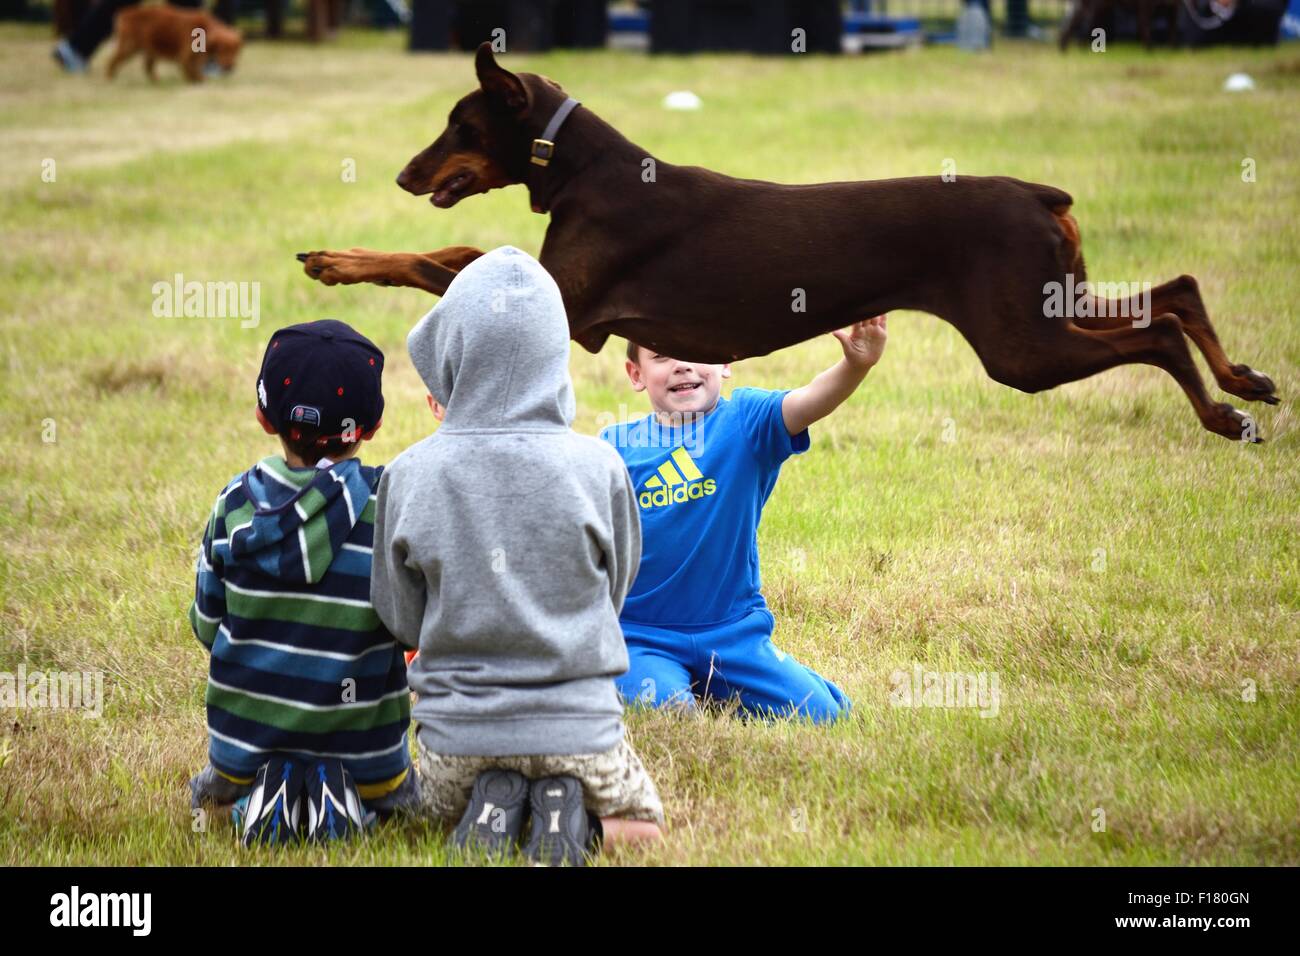 Dobermann dog jumping over children at a country fayre in Hampshire, England Stock Photo